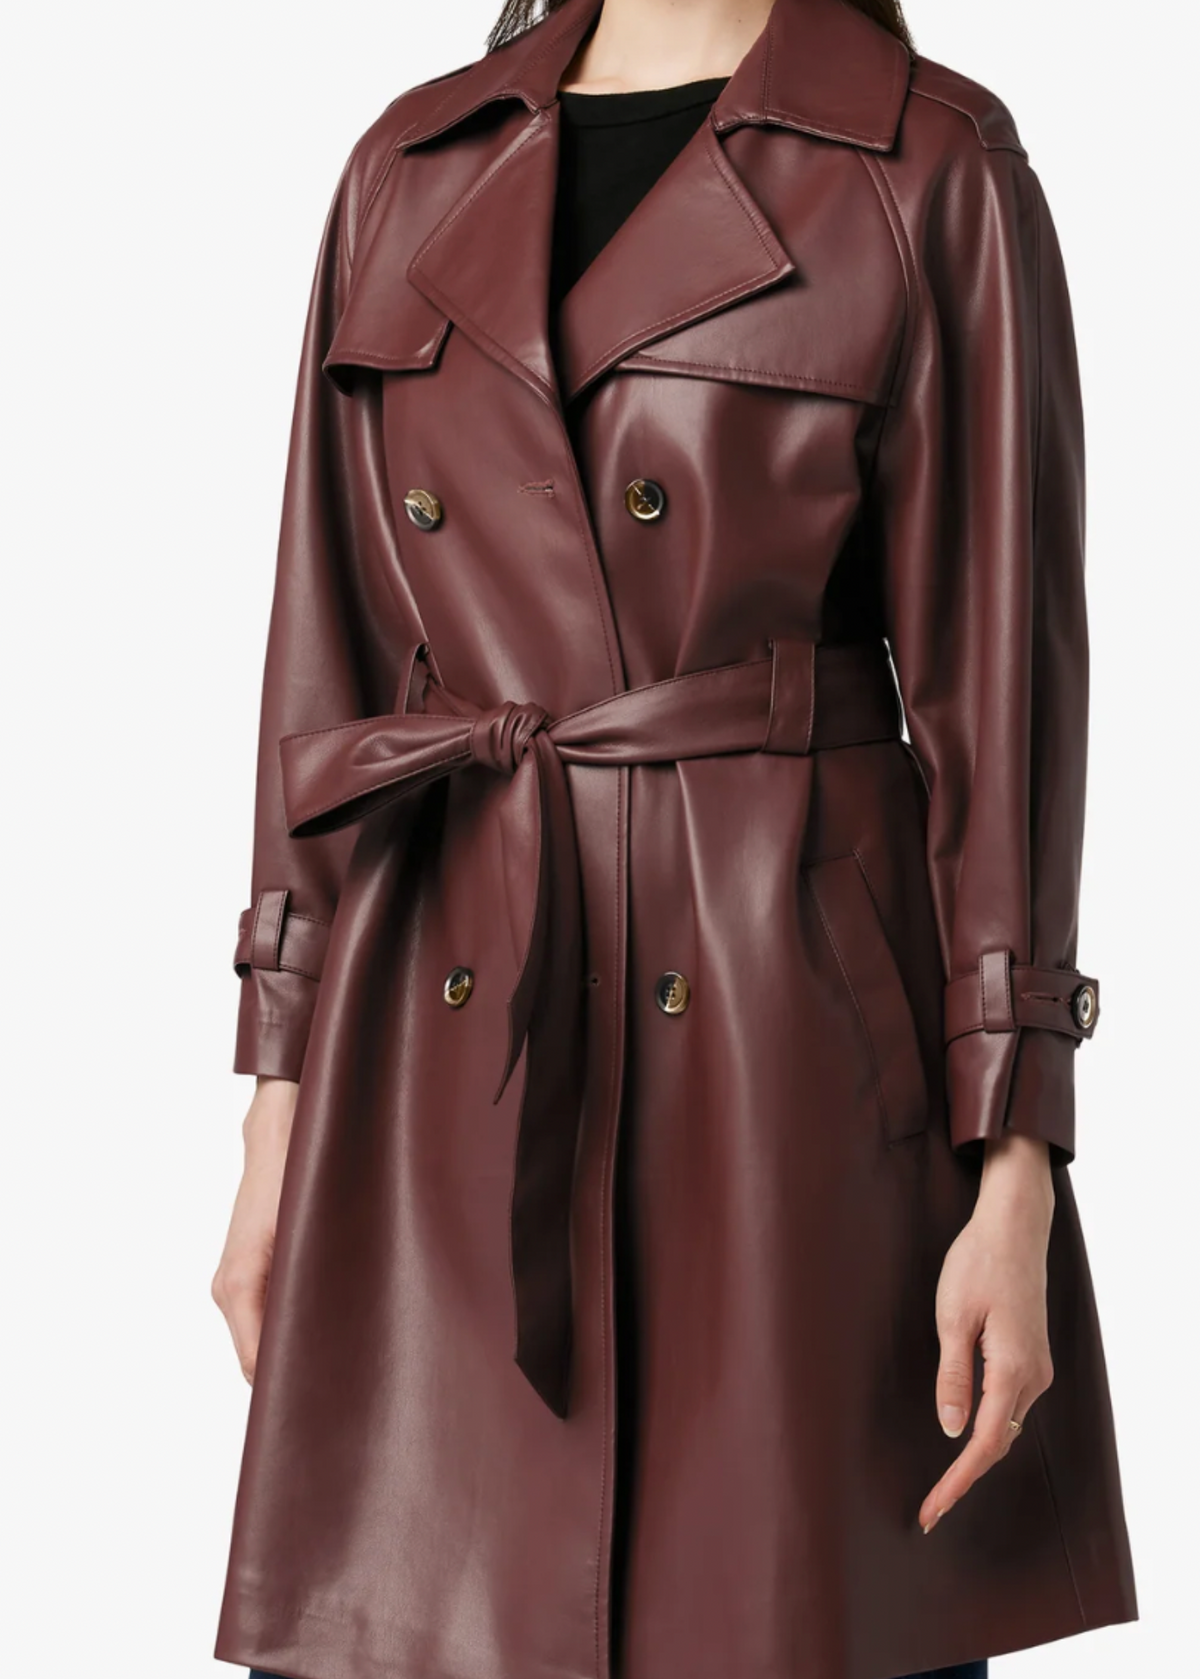 Joes Jeans Eliza Vegan Leather Trench